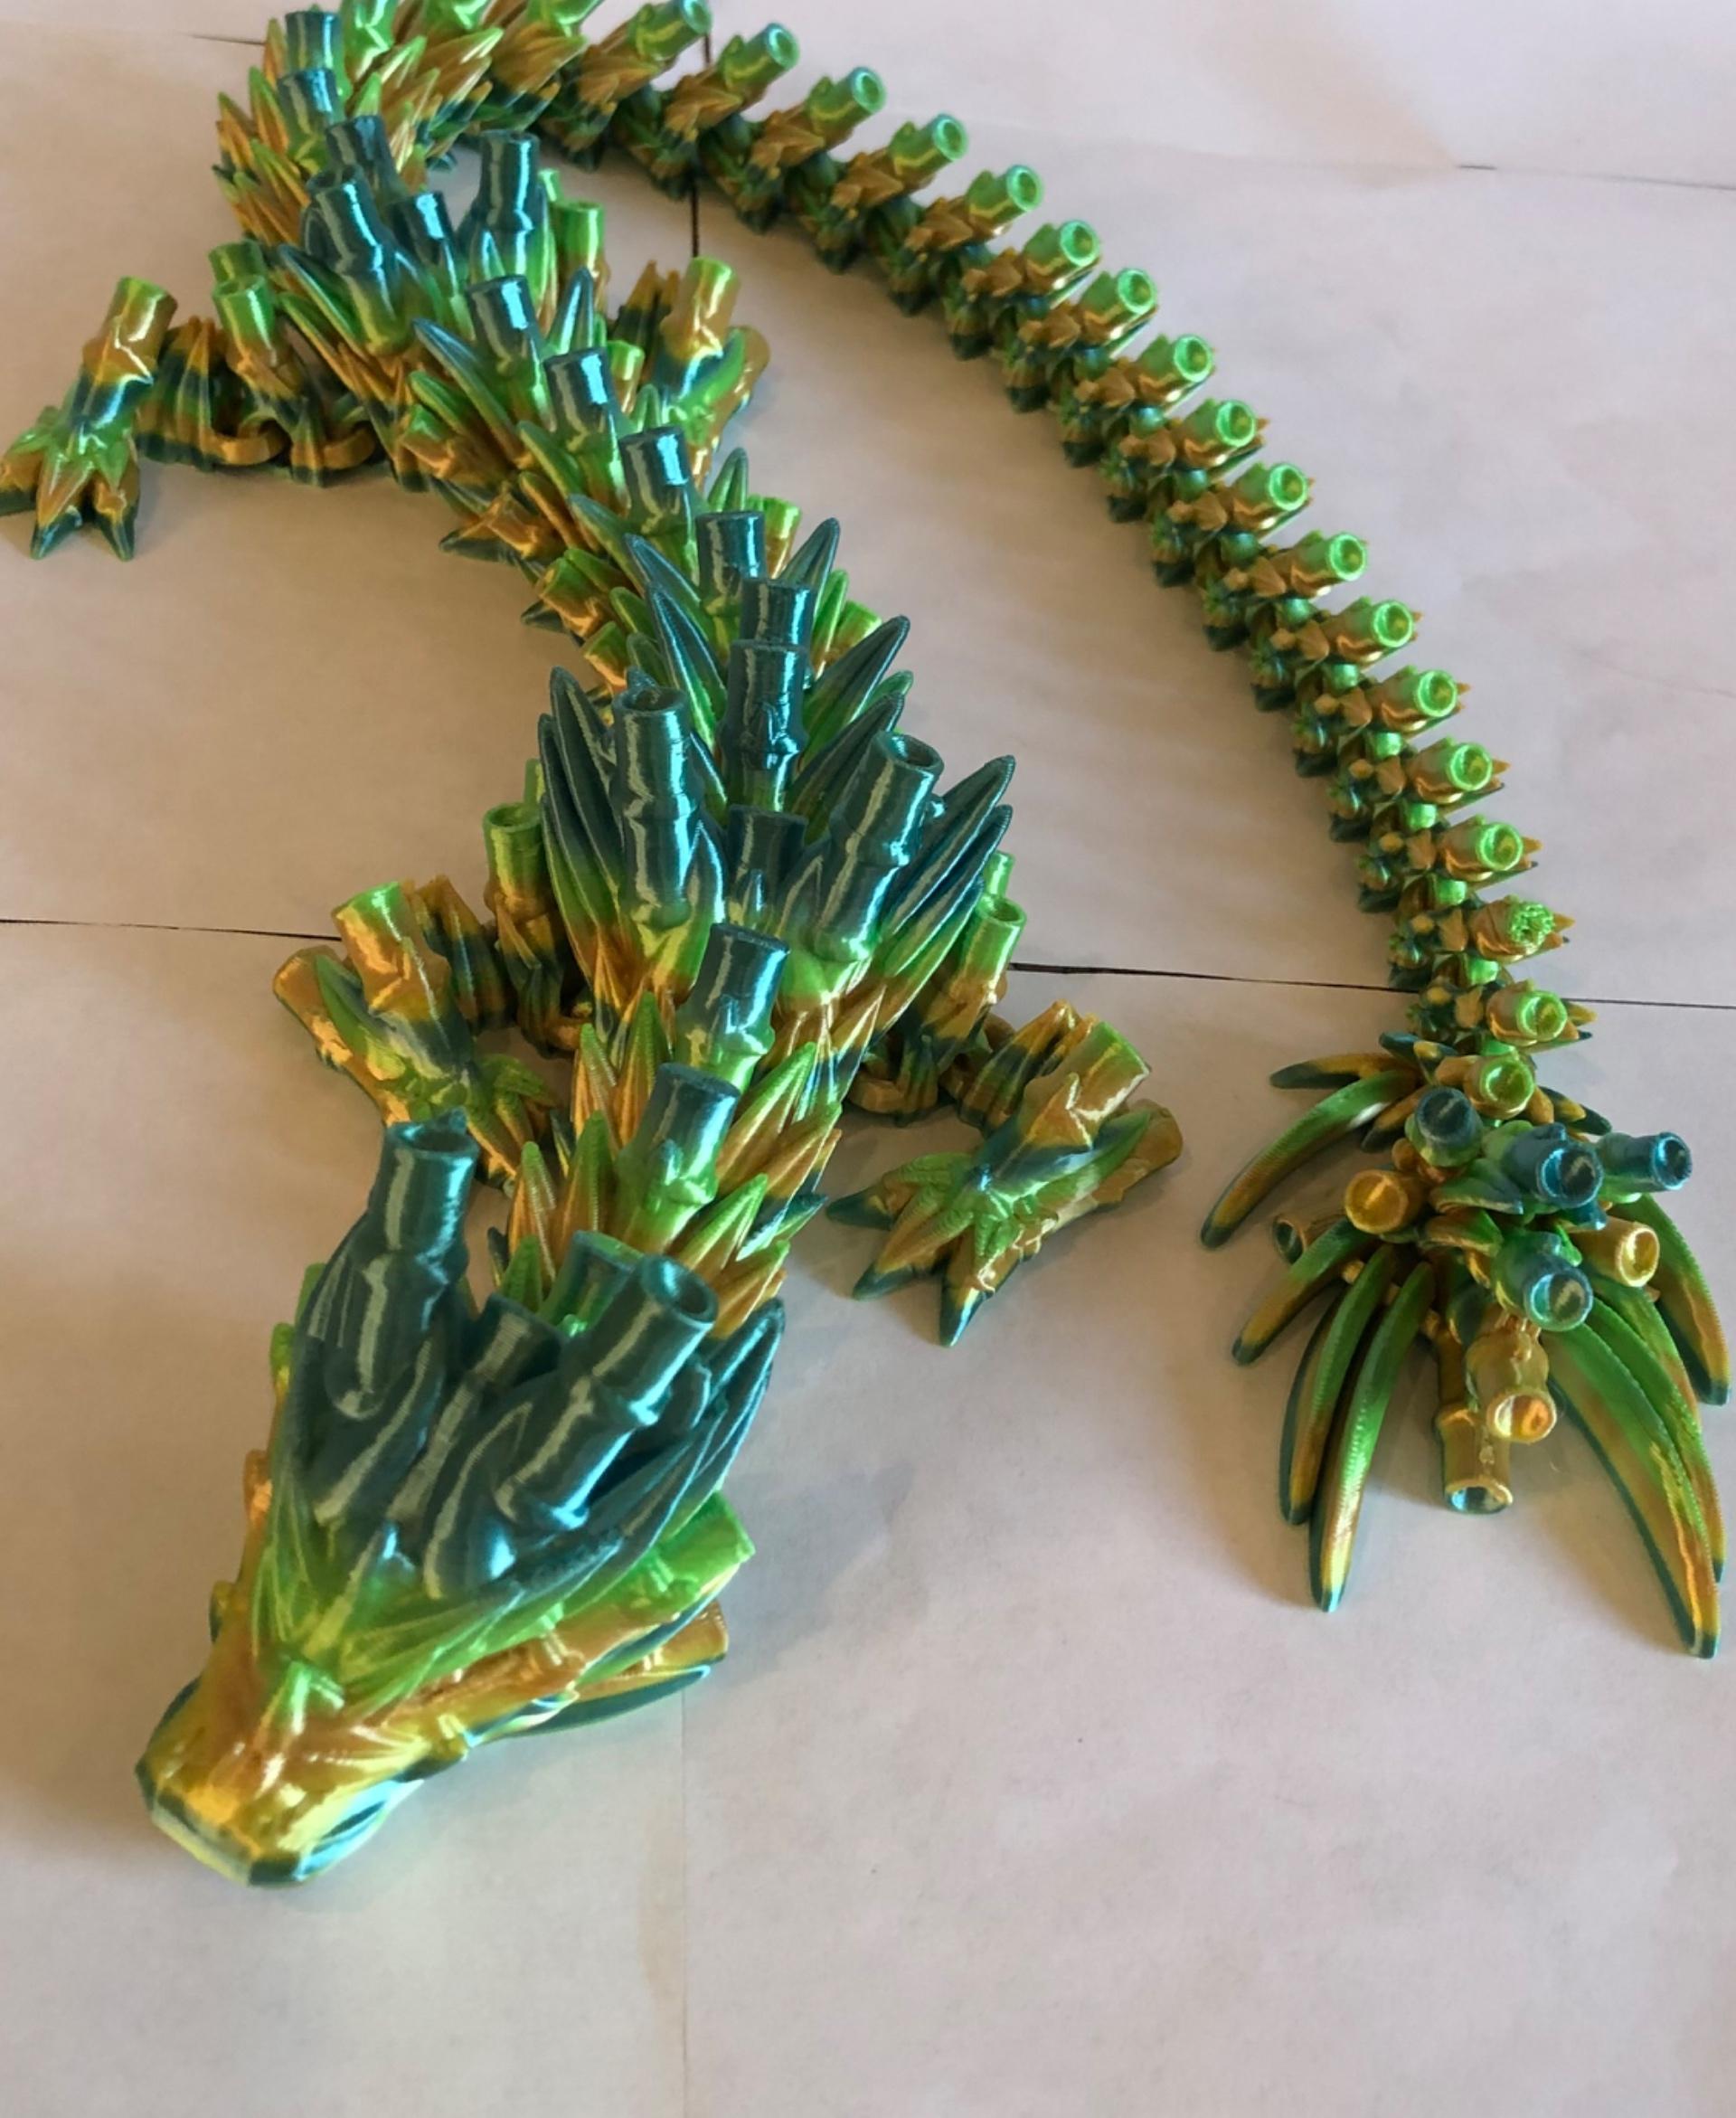 Bamboo Dragon Cinderwing3D X BambuLab - TTY3D Green Yellow Rainbow looks great on this awesome dragon! - 3d model